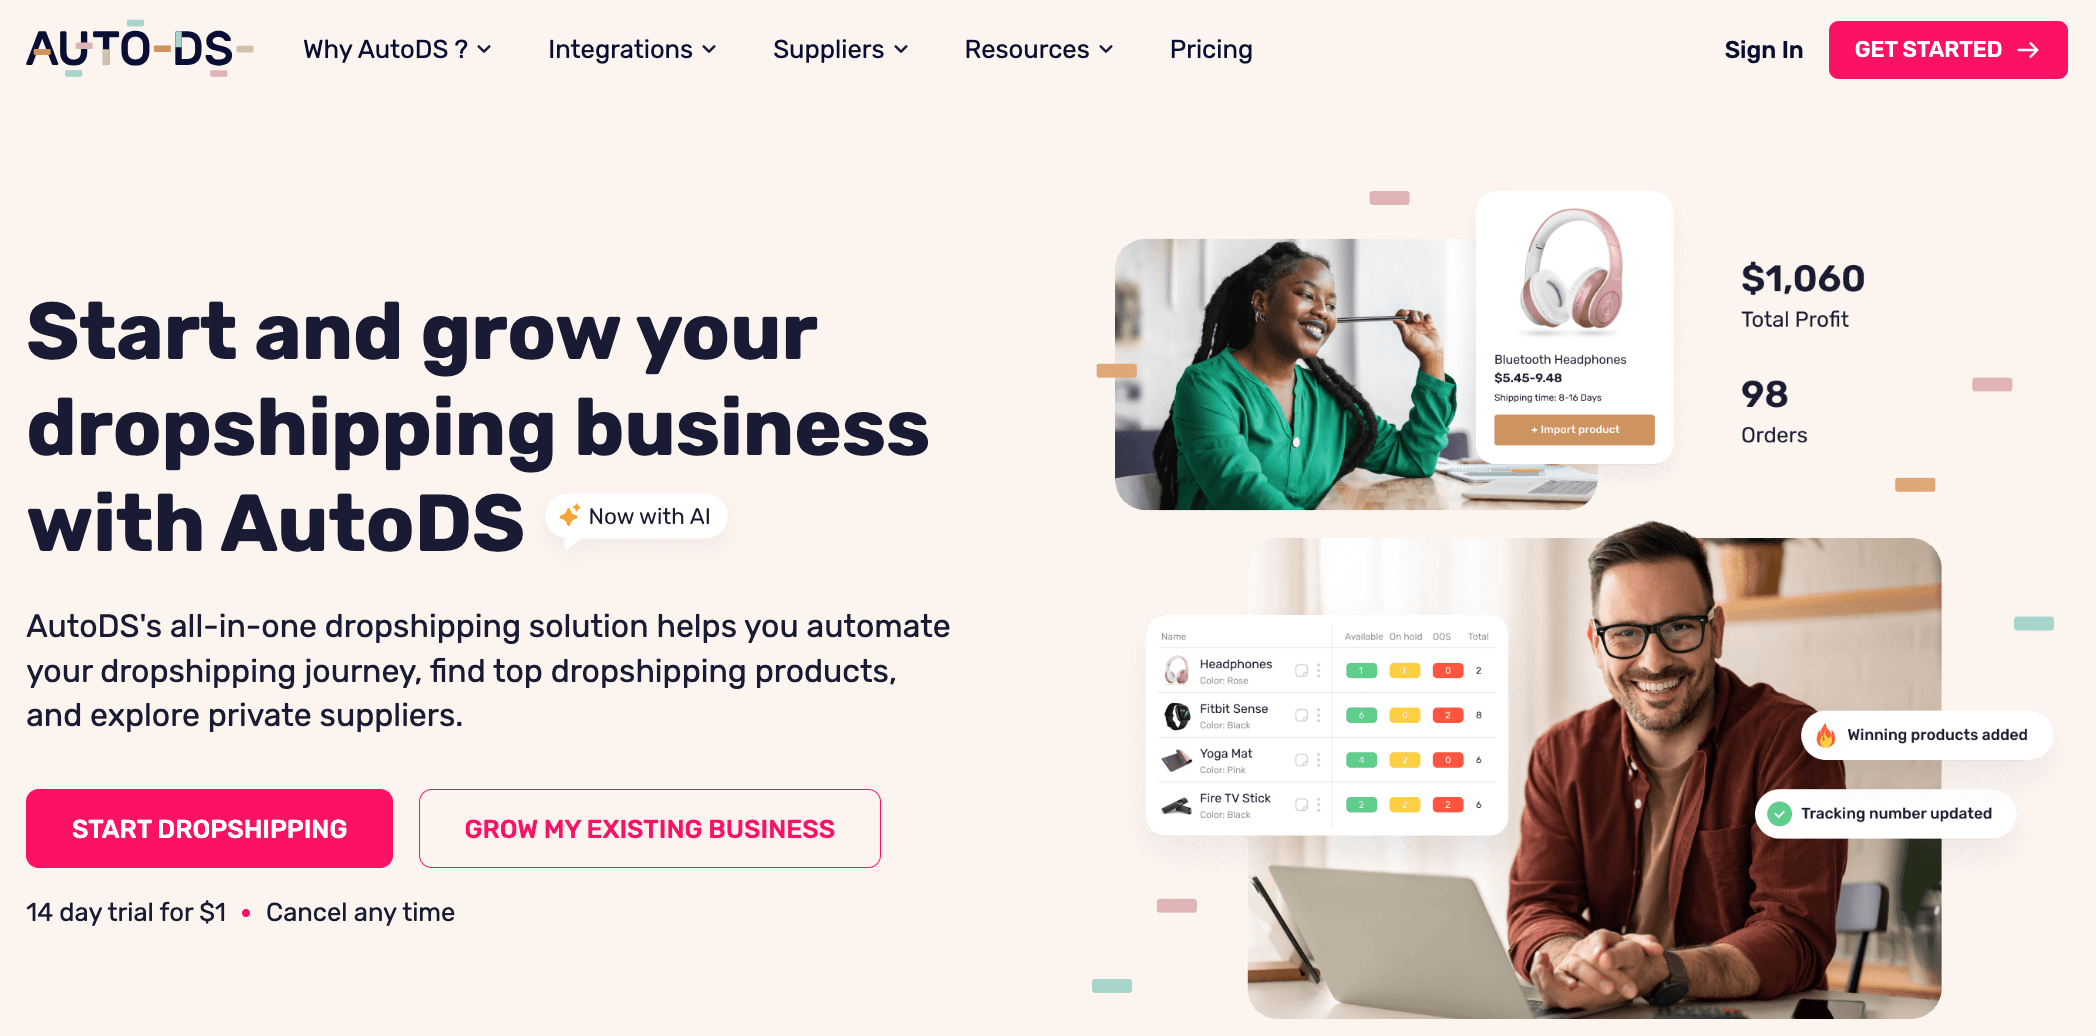 Homepage showing how to grow your business with AutoDS